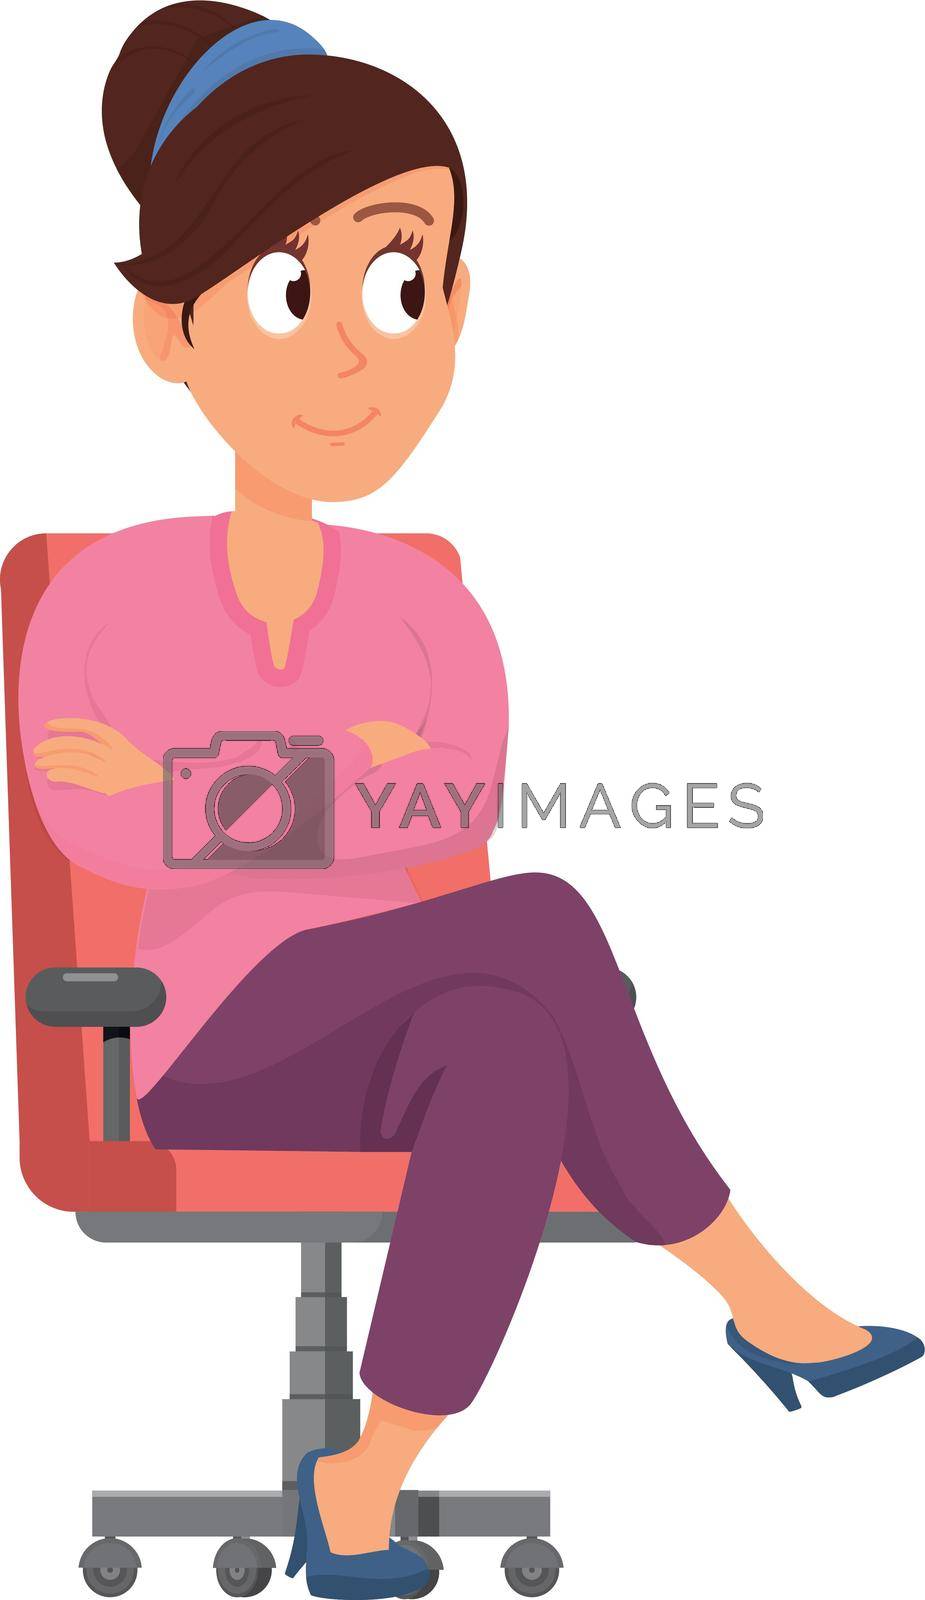 Royalty free image of Woman sitting in computer chair. Office worker character by LadadikArt